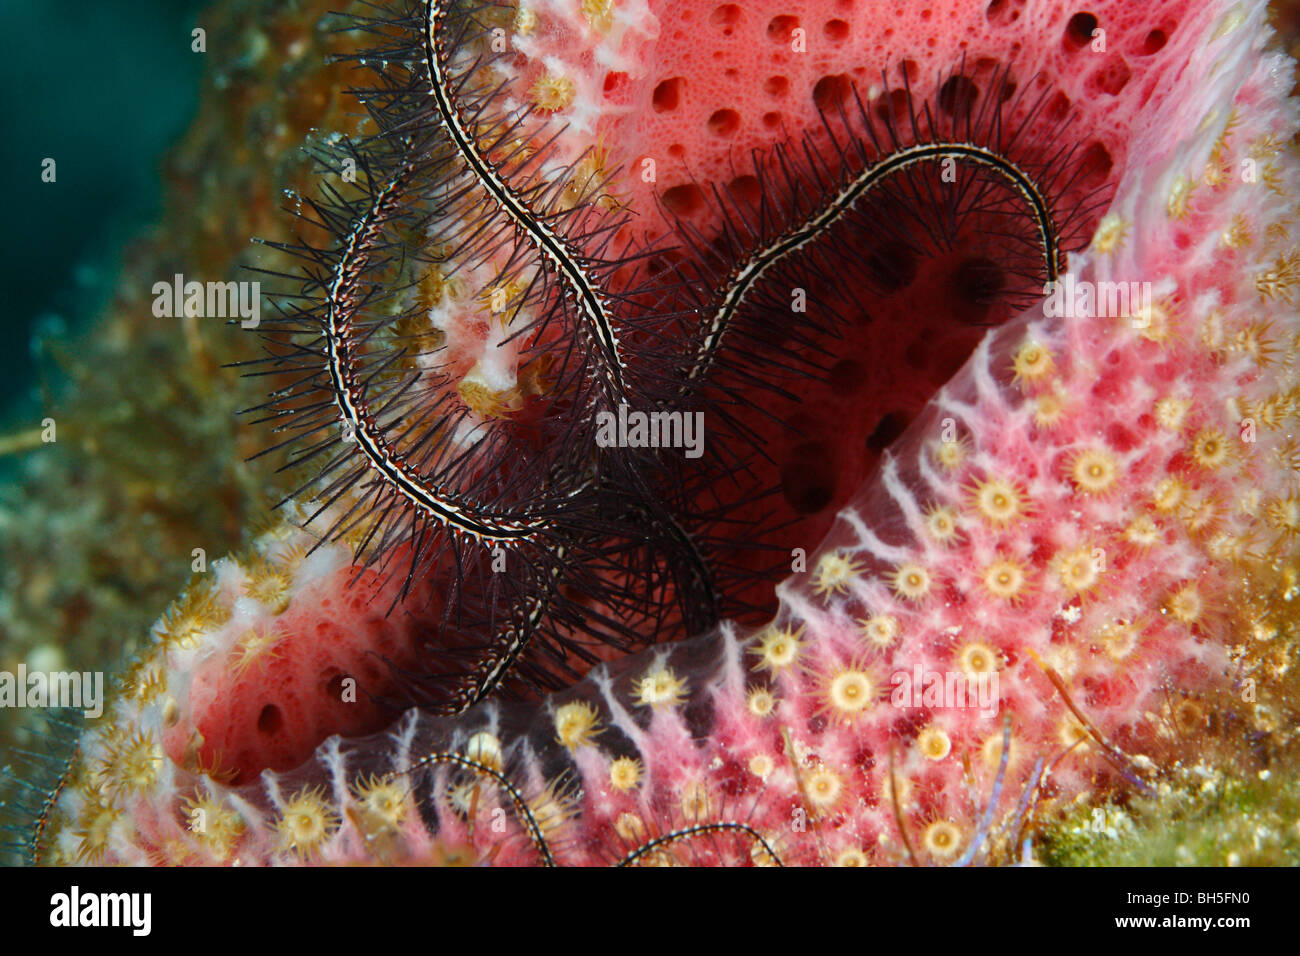 Striped Brittle star on a bright pink sponge covered with yellow parasitic animals zoanthids Stock Photo